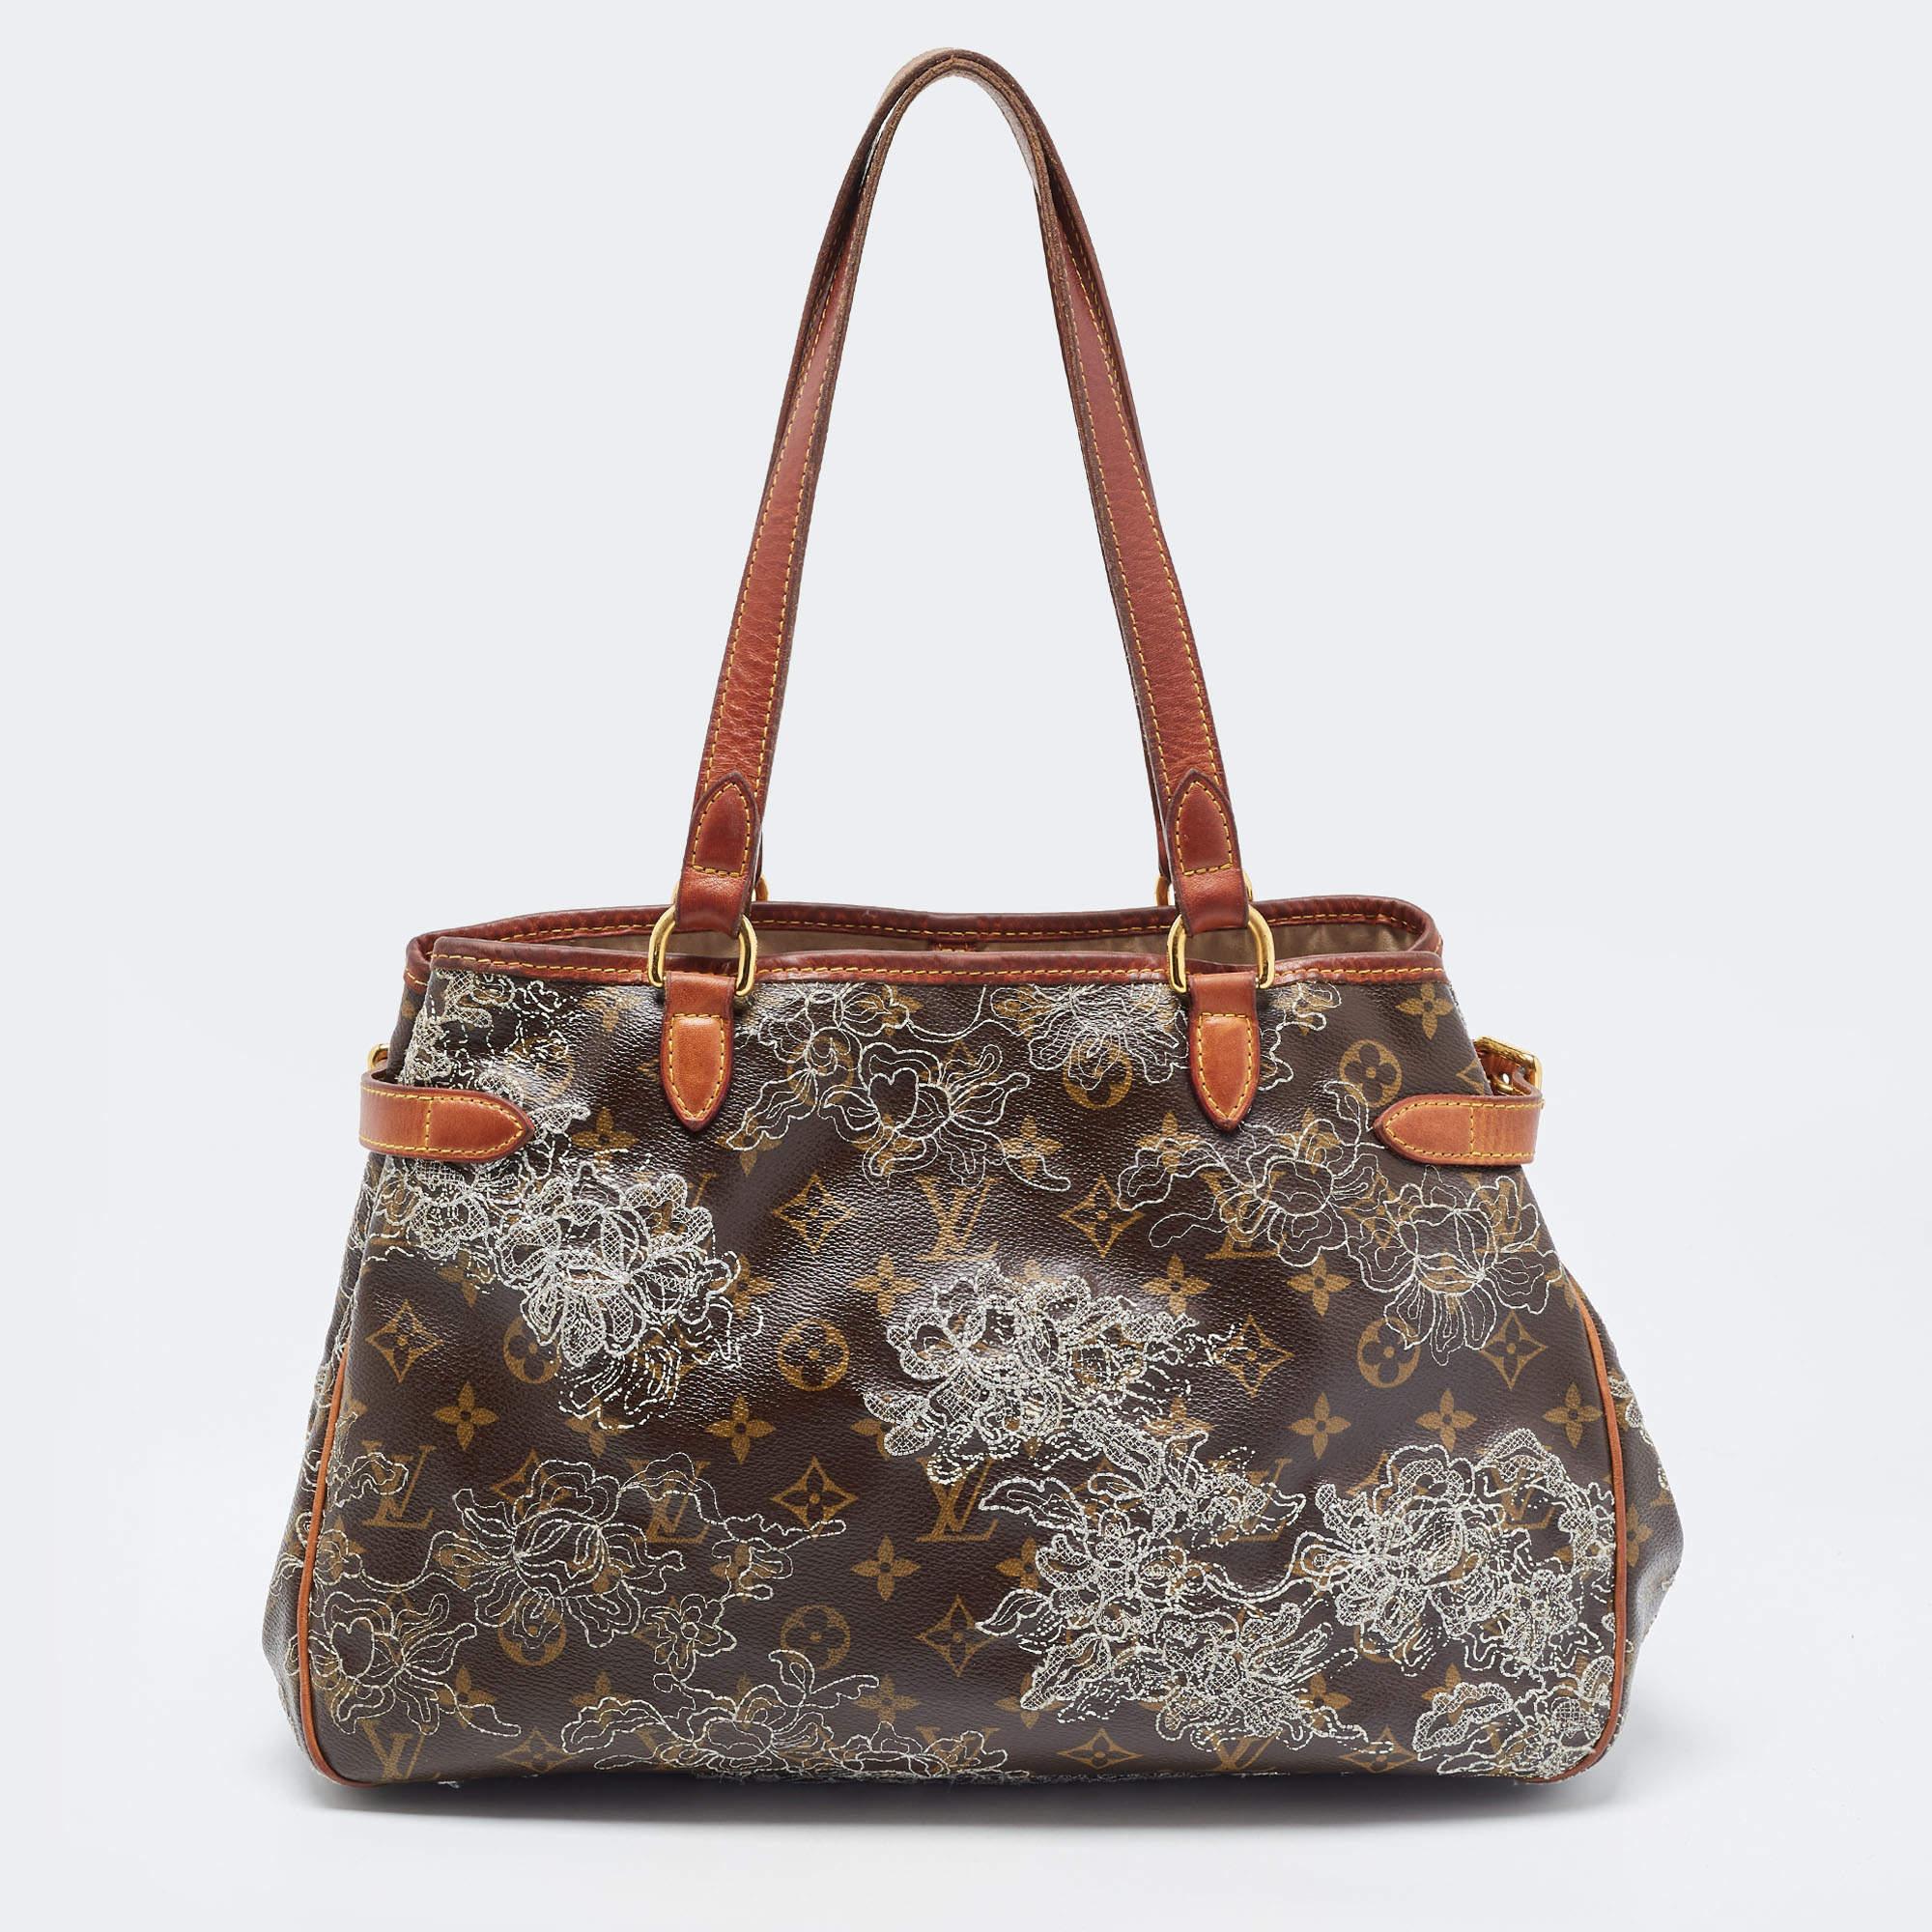 This Limited Edition Dentelle Batignolles is a must-have for any Louis Vuitton enthusiast. The classic LV Monogram canvas features an exquisite lace embroidery design, while the luxurious polished gold-tone hardware, leather trim, piping, and straps